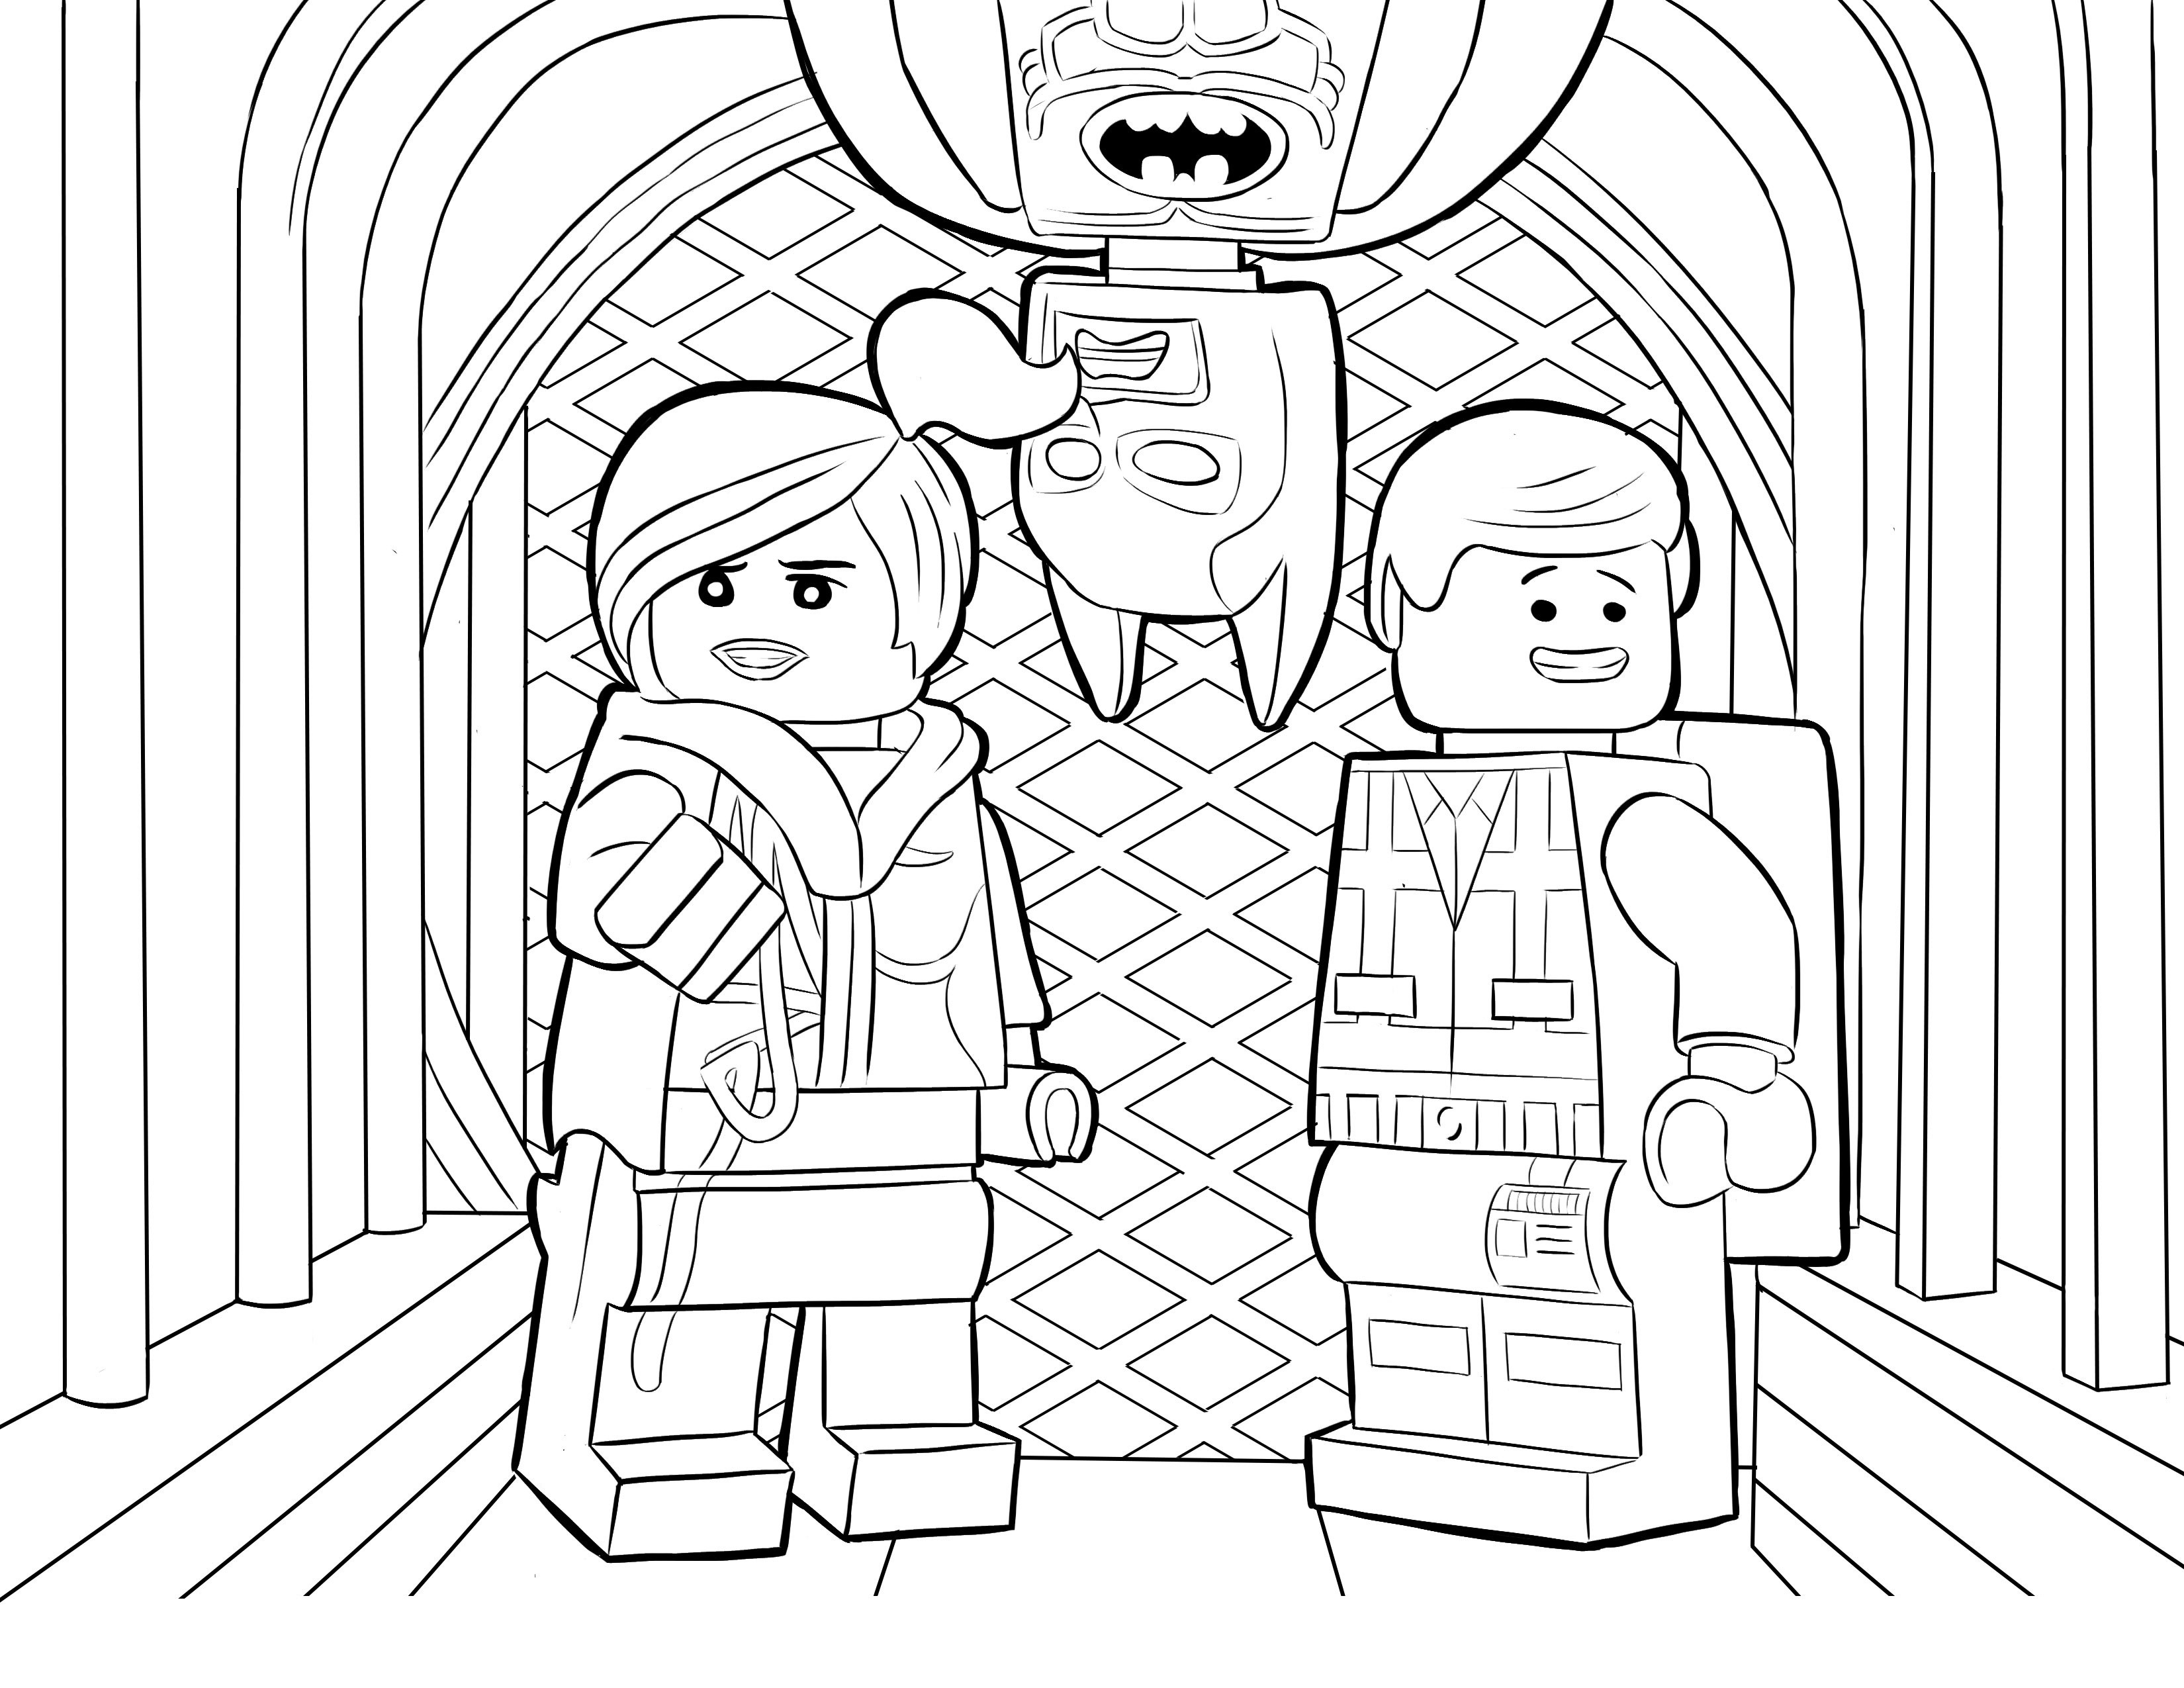 Movie Coloring Pages For Boys
 lego coloring pages 07